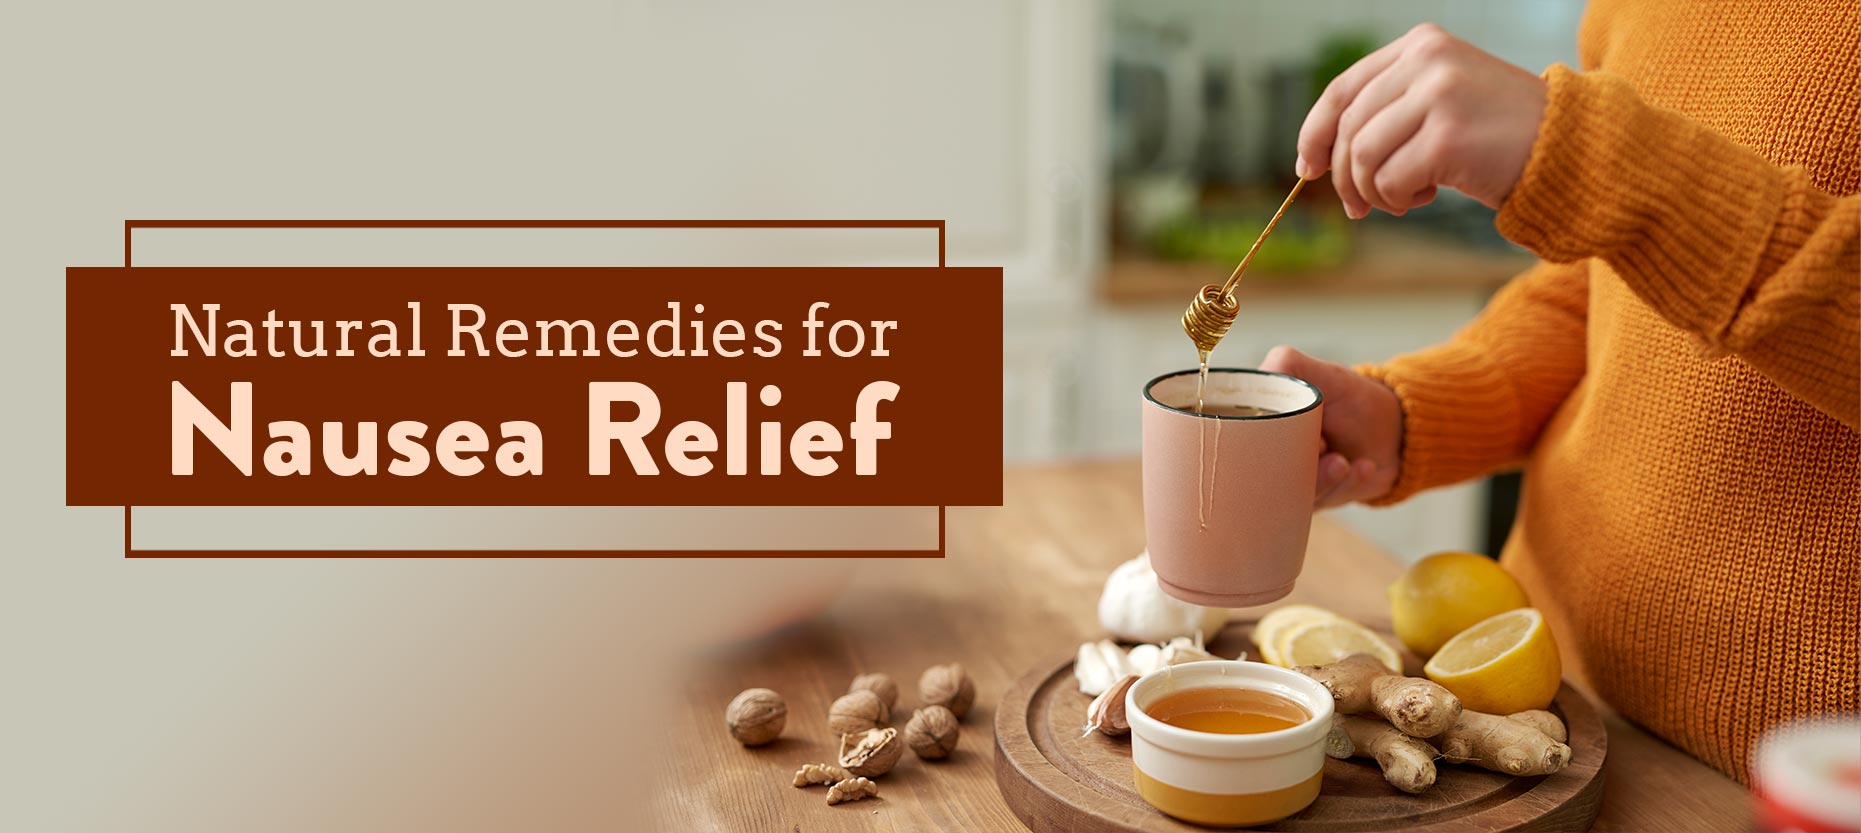 Natural Remedies For Nausea Relief